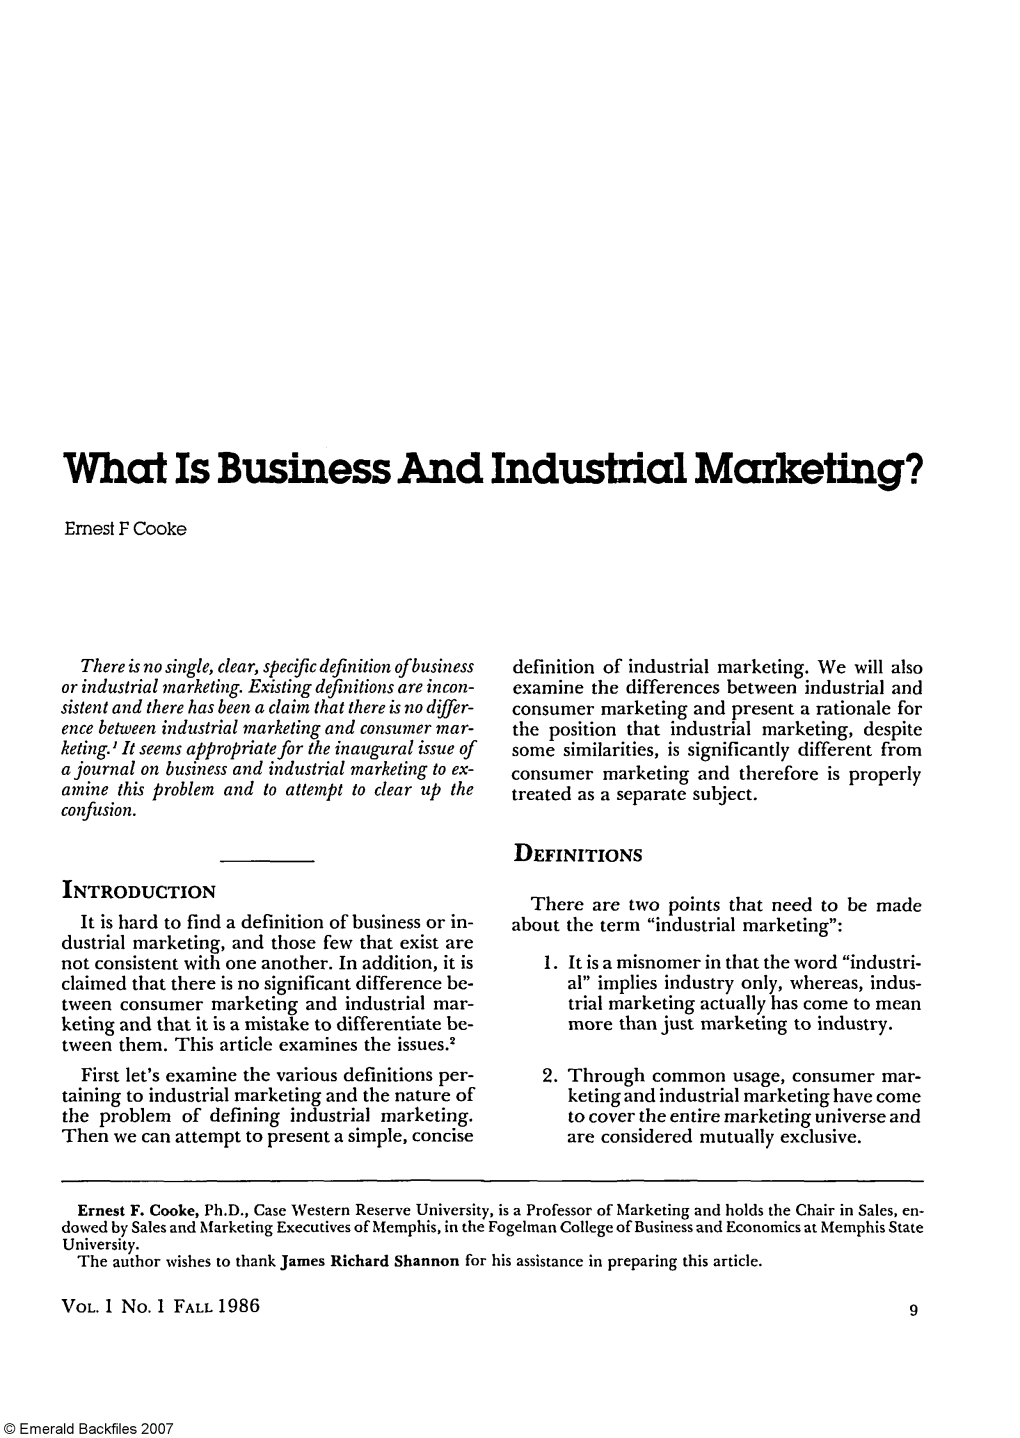 What Is Business and Industrial Marketing?